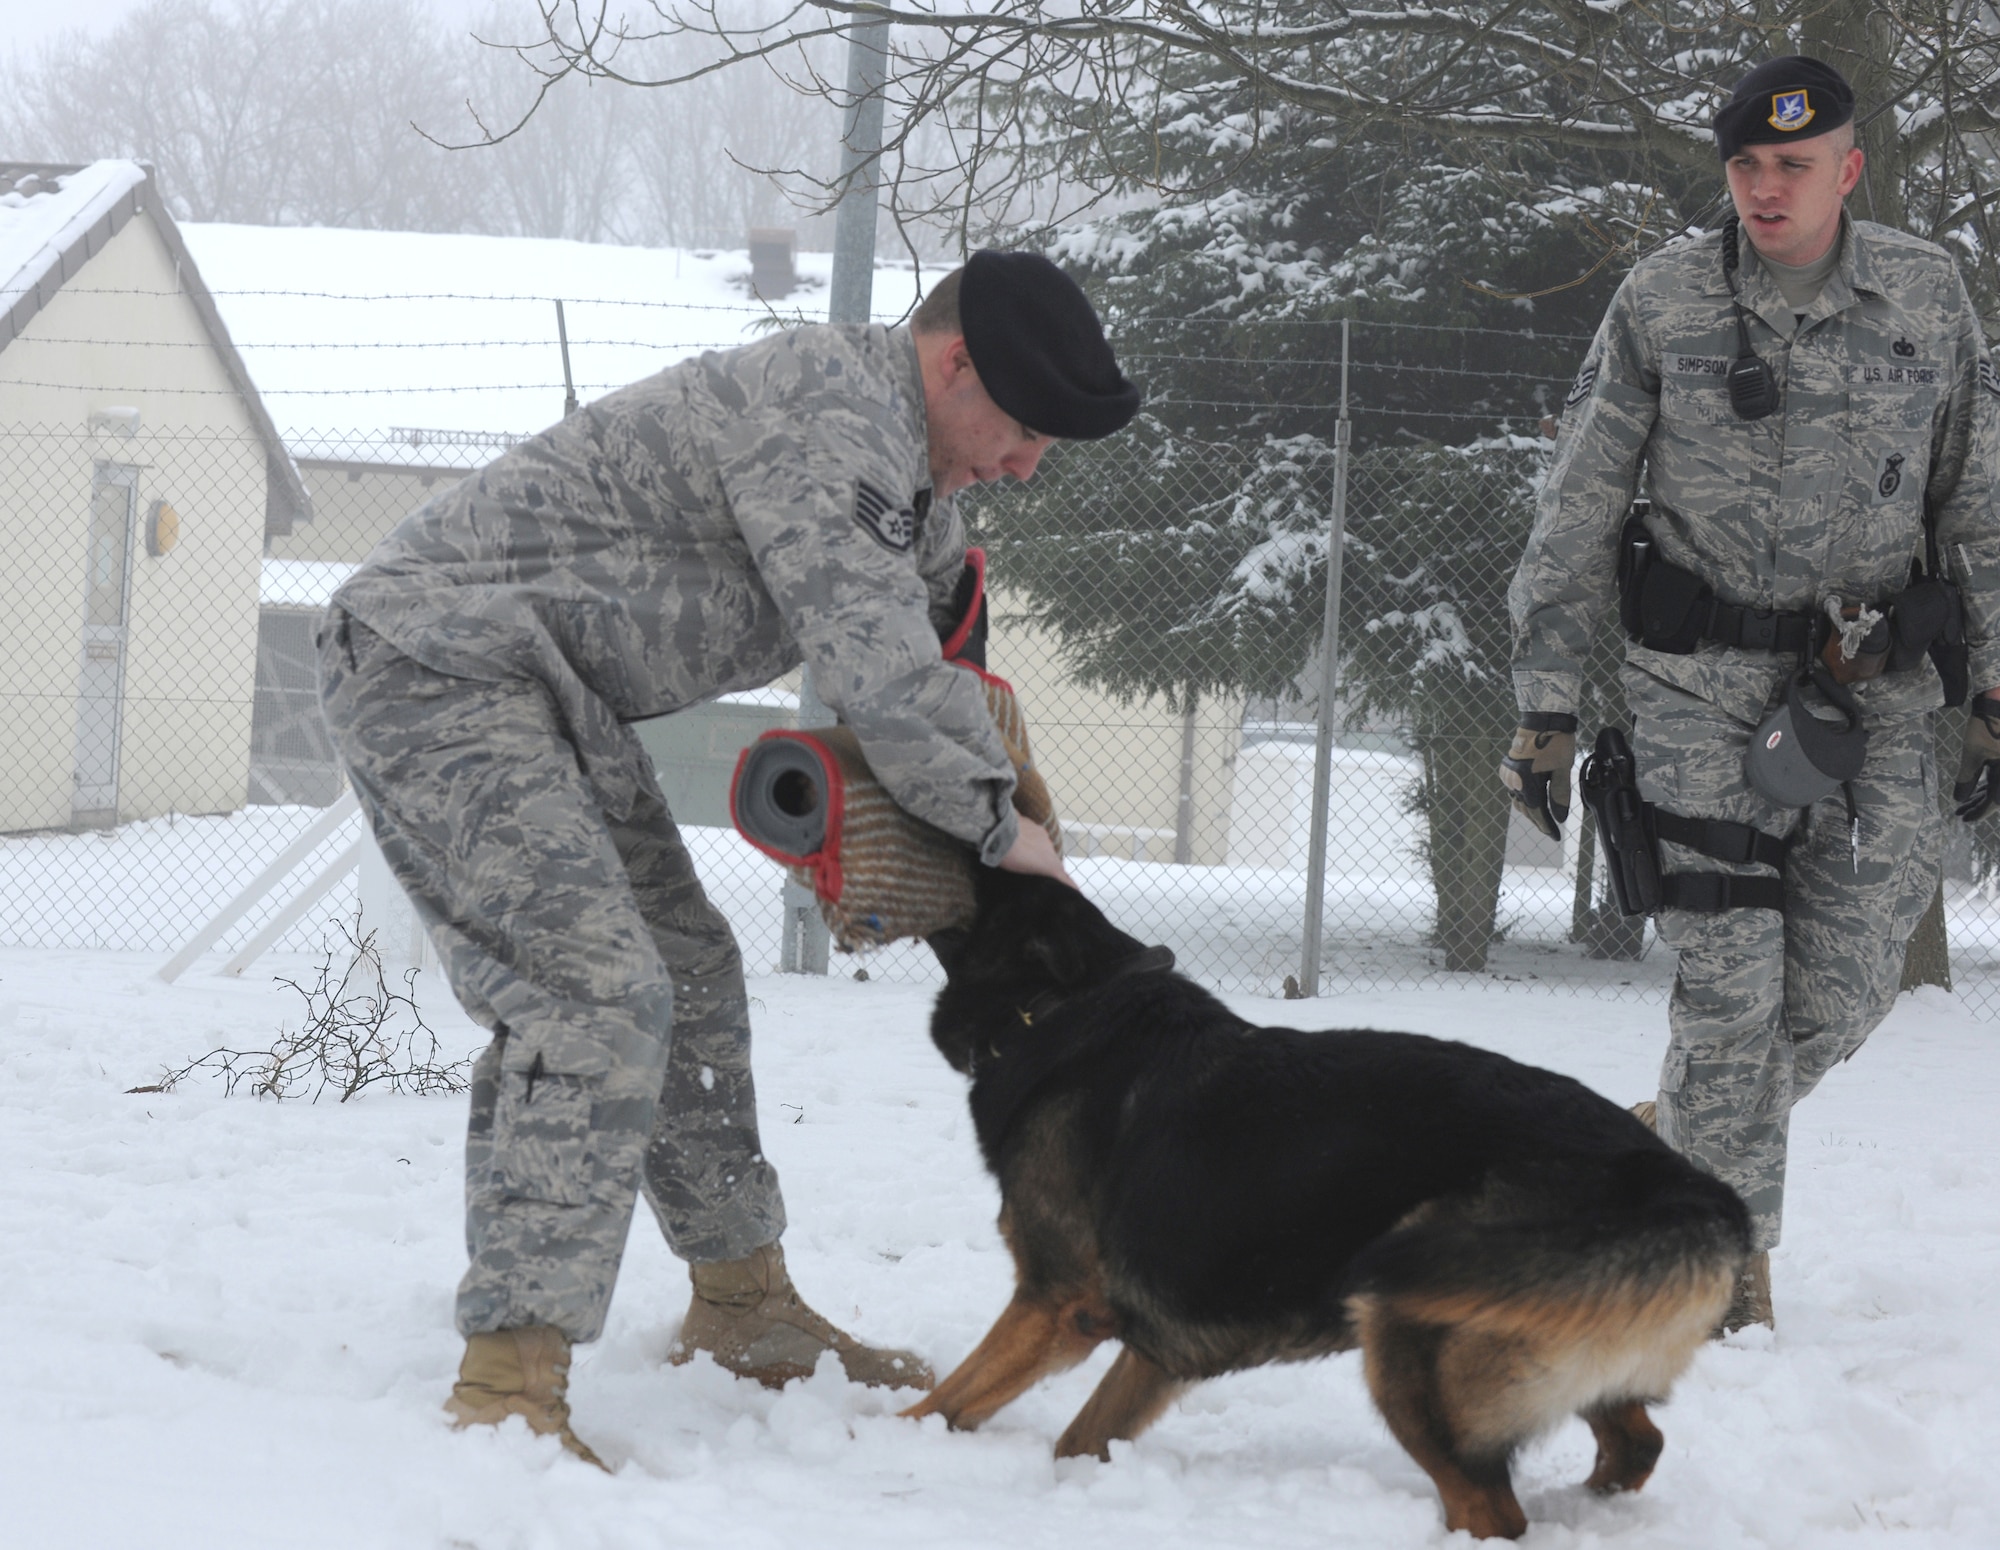 SPANGDAHLEM AIR BASE, Germany – Robson, a 5-year-old German Shepherd, attacks as Staff Sgt. William Washer, 52nd Security Forces Squadron military working dog handler, tries to escape during a training exercise at the 52nd SFS military working dog facility Dec. 29. Handlers play and train with their dogs in the snow to acclimate them to cold German winters and harsh conditions that they must work in. (U.S. Air Force photo/Senior Airman Nathanael Callon)